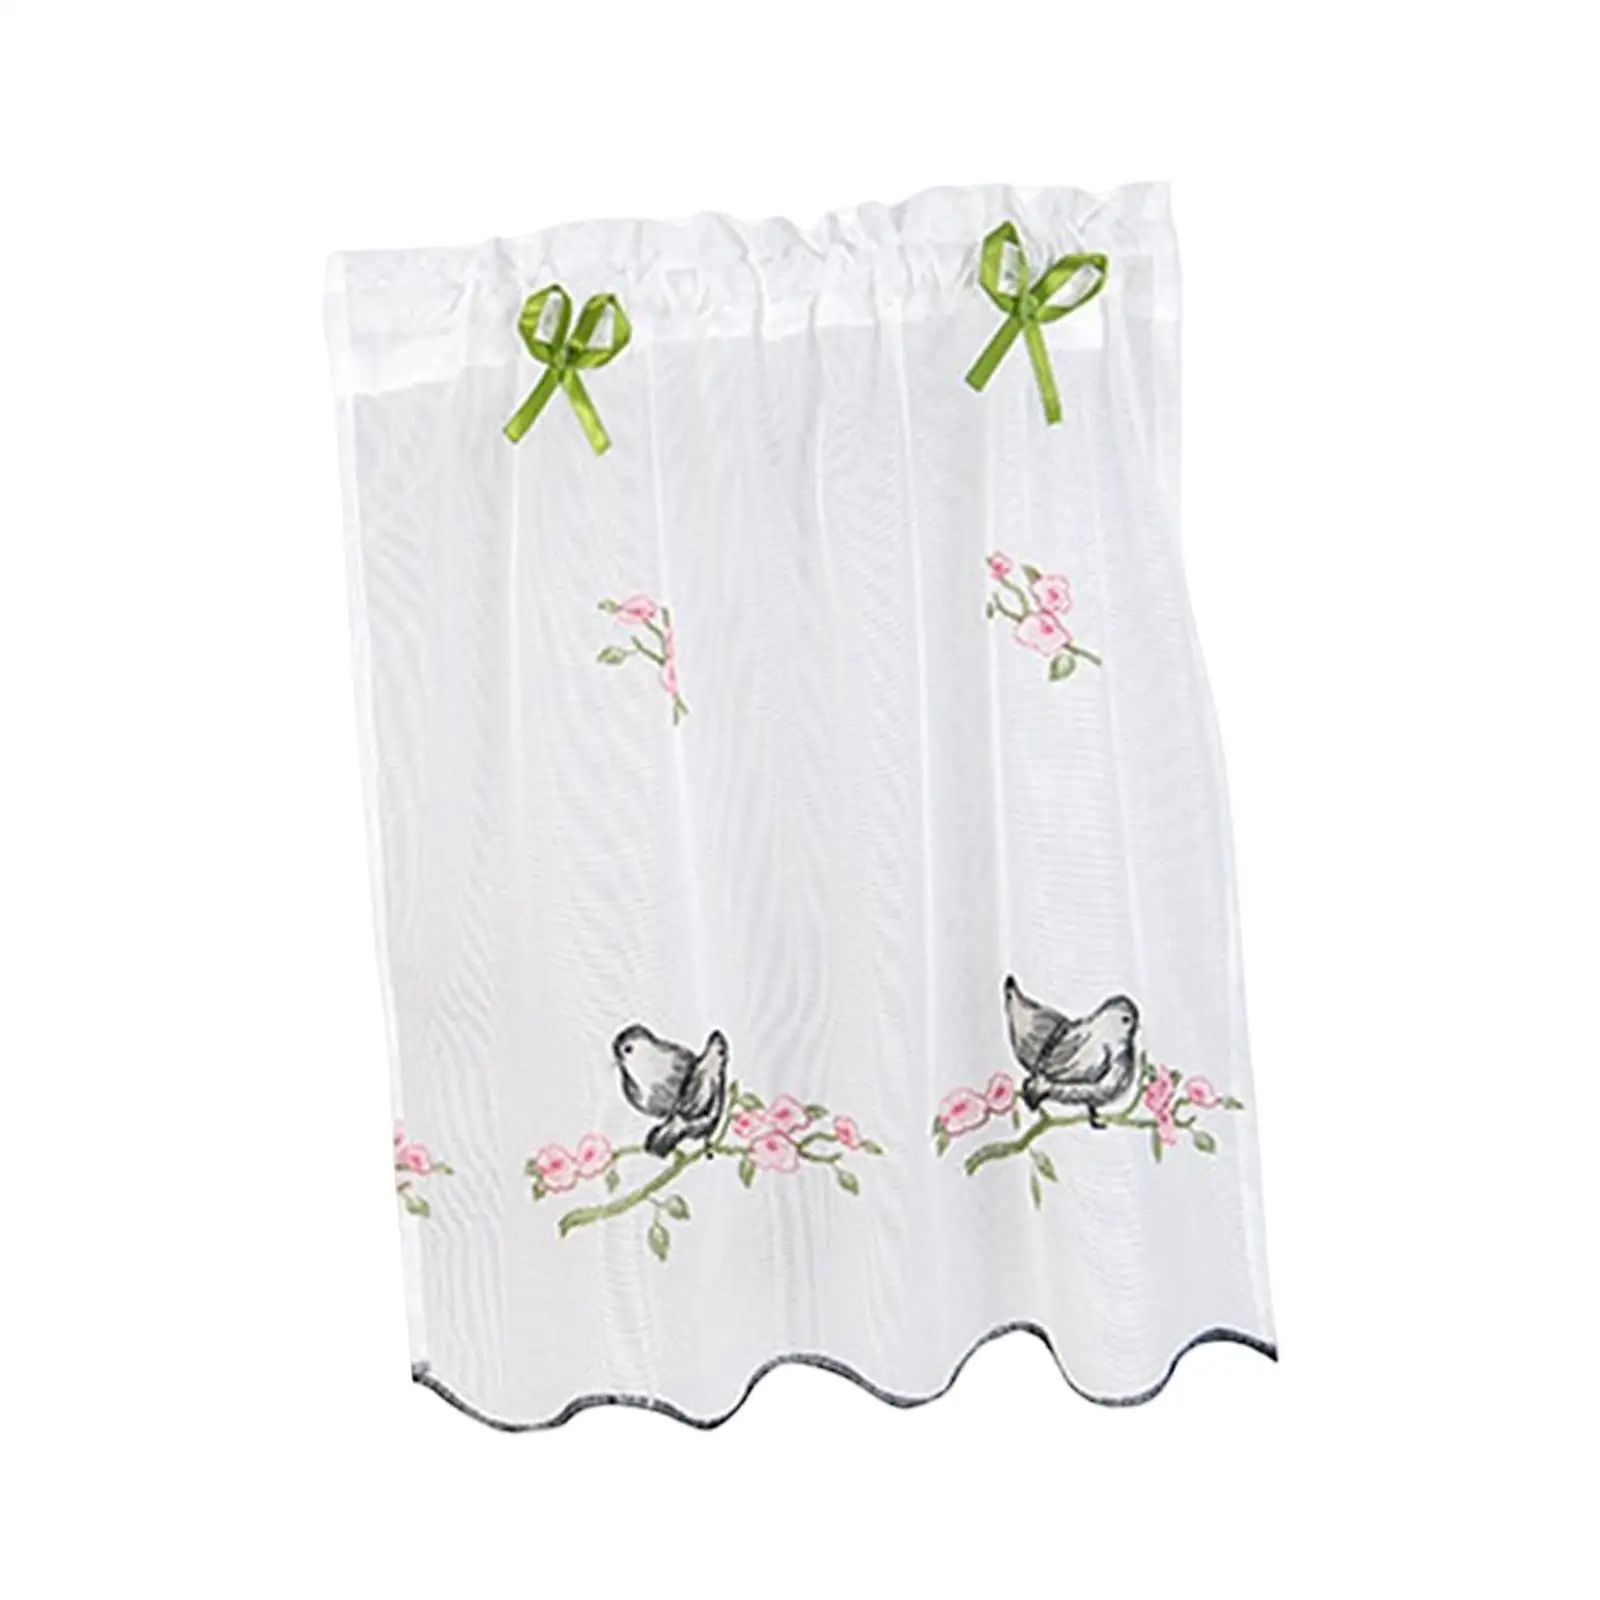 Rod Pocket Short Curtain Drapes Half Window Covering Embroidered Half Curtain for Farmhouse Bedroom Kitchen Living Room Cafe